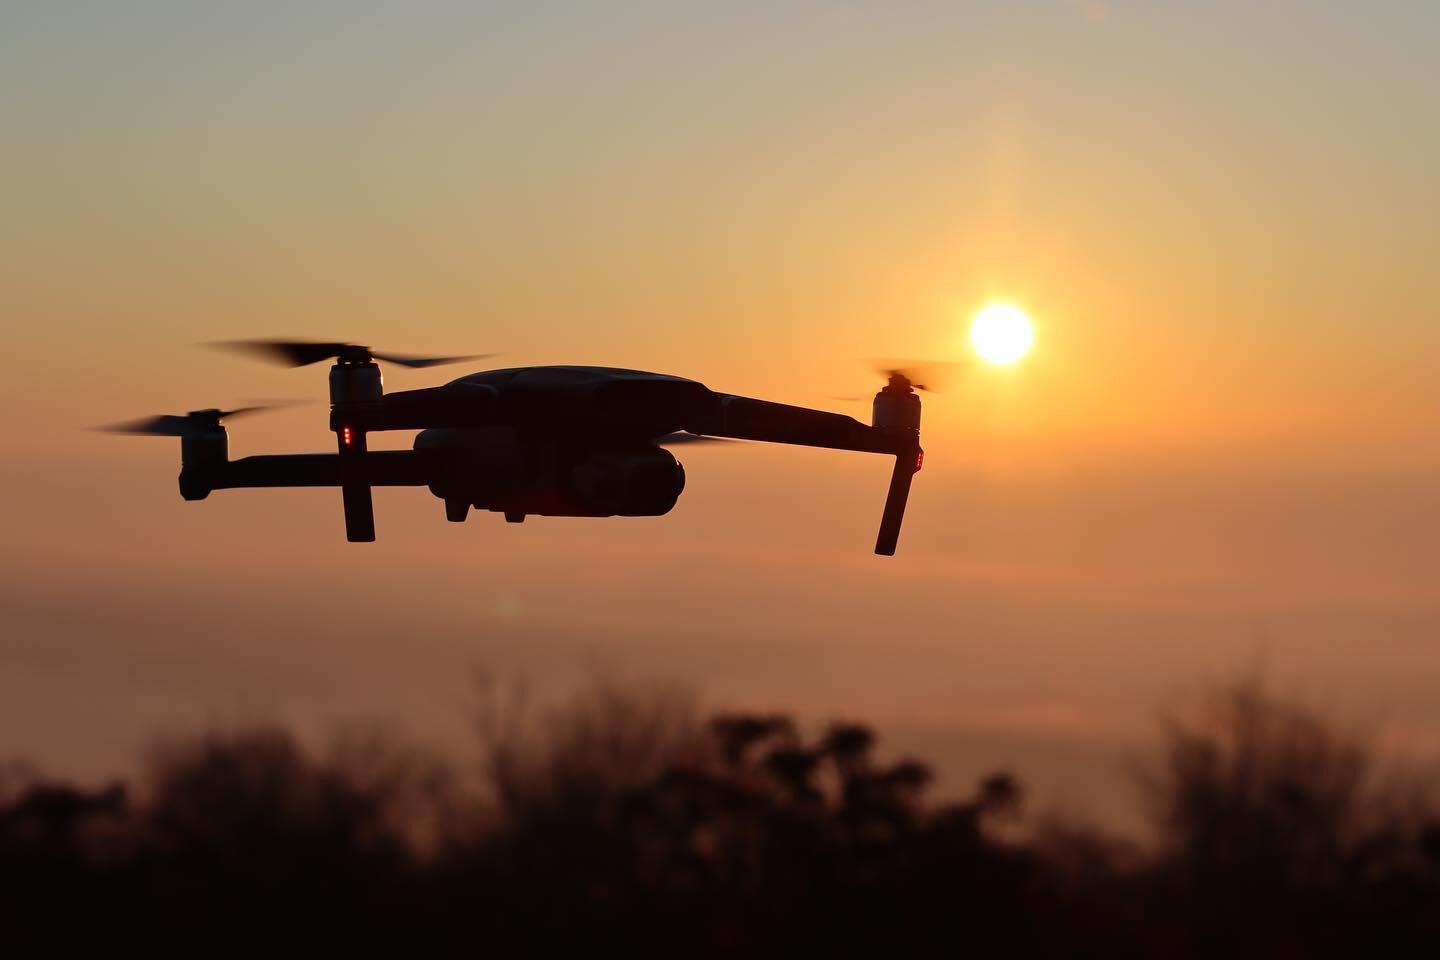 Name a better way to capture the sunset&hellip;.it&rsquo;s okay&hellip;we&rsquo;ll wait&hellip;
.
.
.
.

#drone #dronestagram #drones #dronephotography #droneoftheday #dronegear #dronefly #dronelife #dronesdaily #droneporn #dronepilot #dronephoto #dr